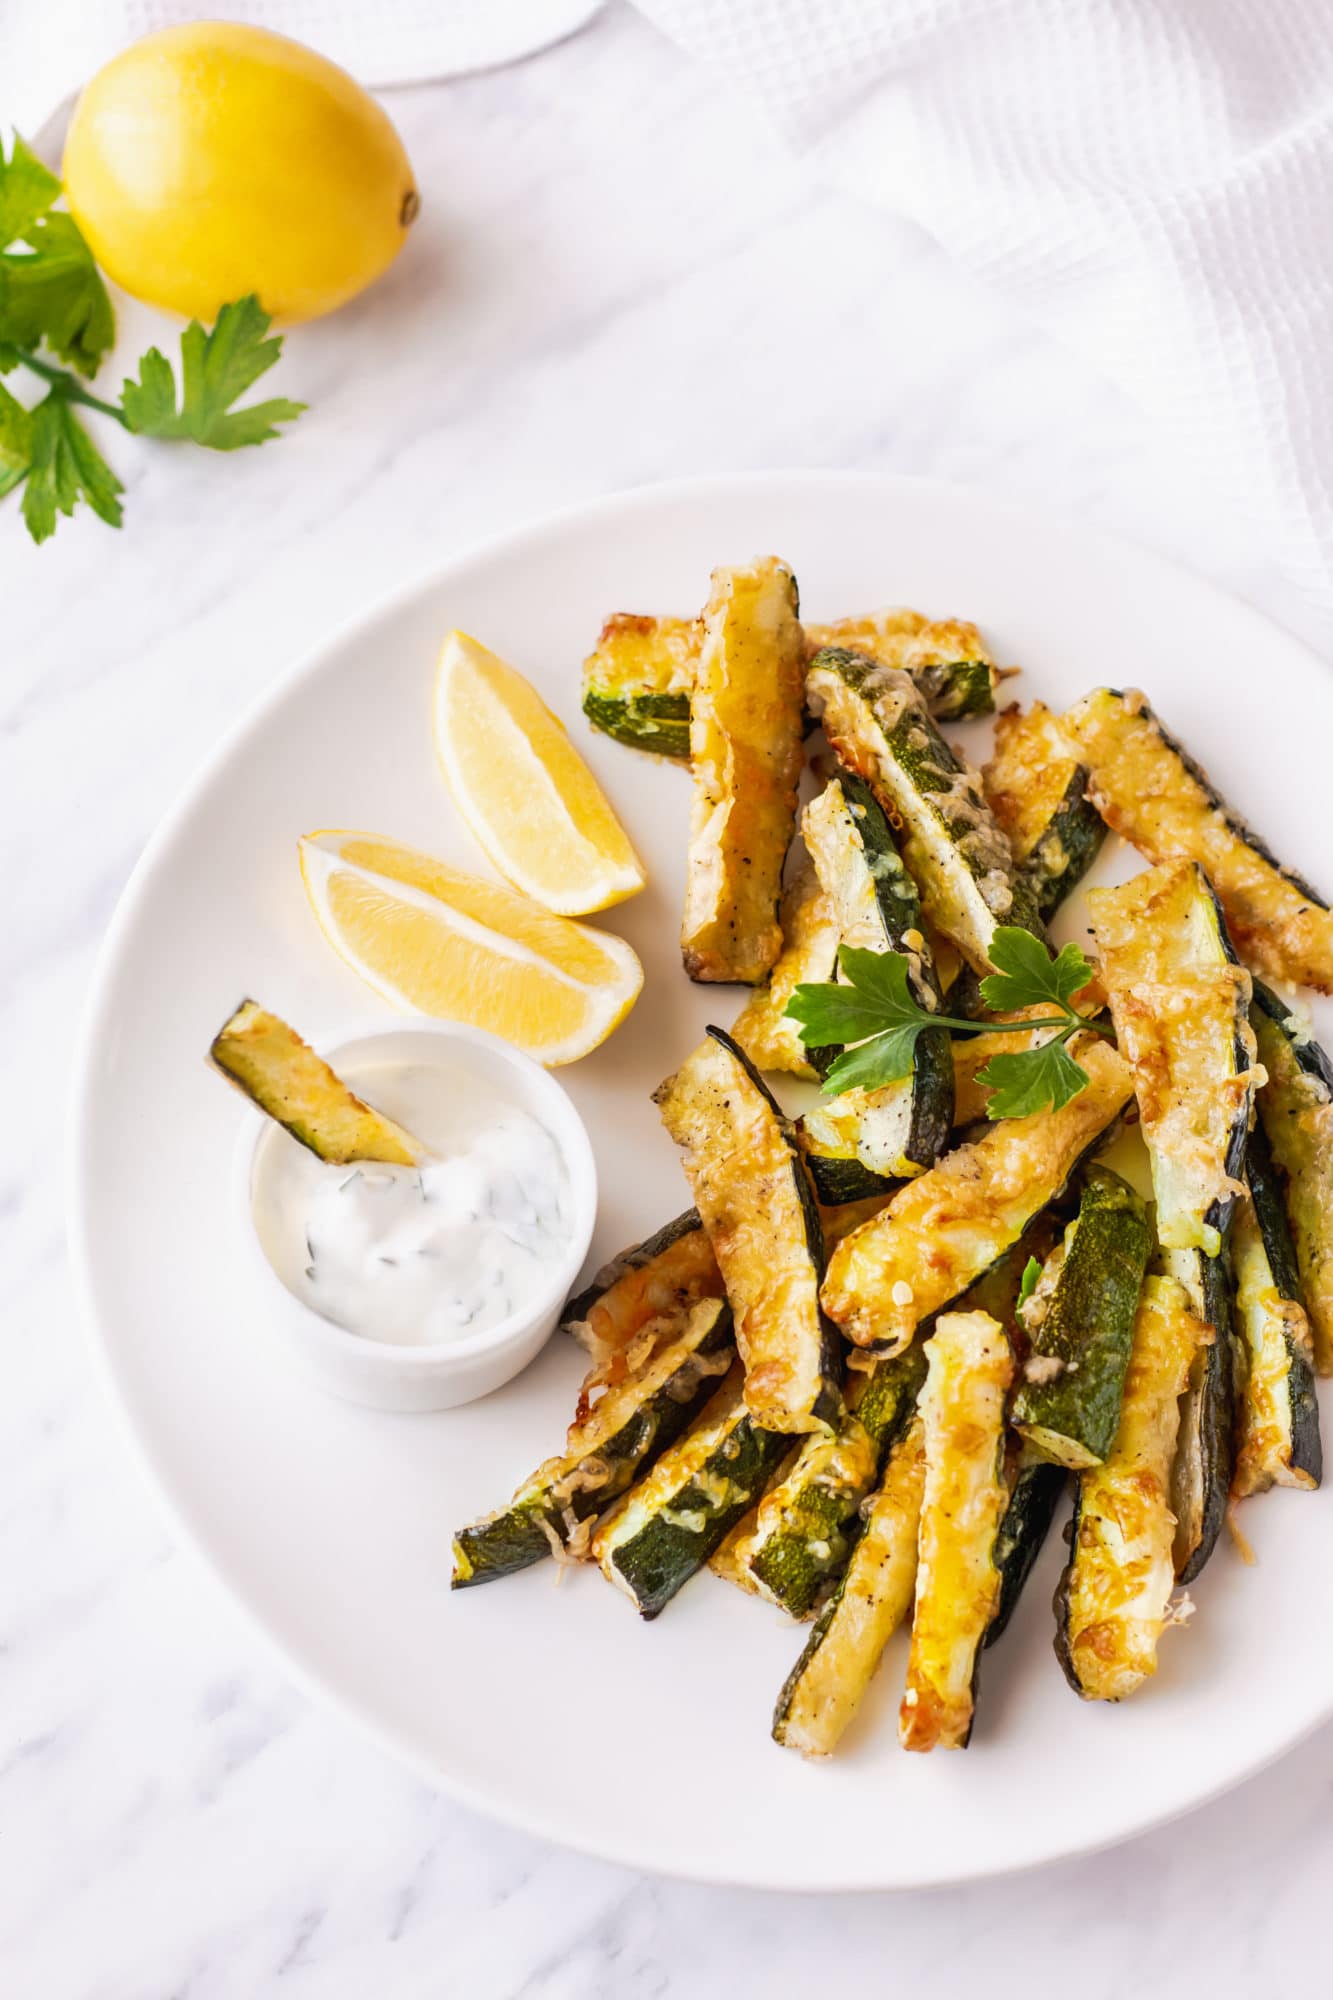 zucchini-bites-on-a-white-plate-with-a-bowl-of-dip-and-lemon-wedges-on-the-side